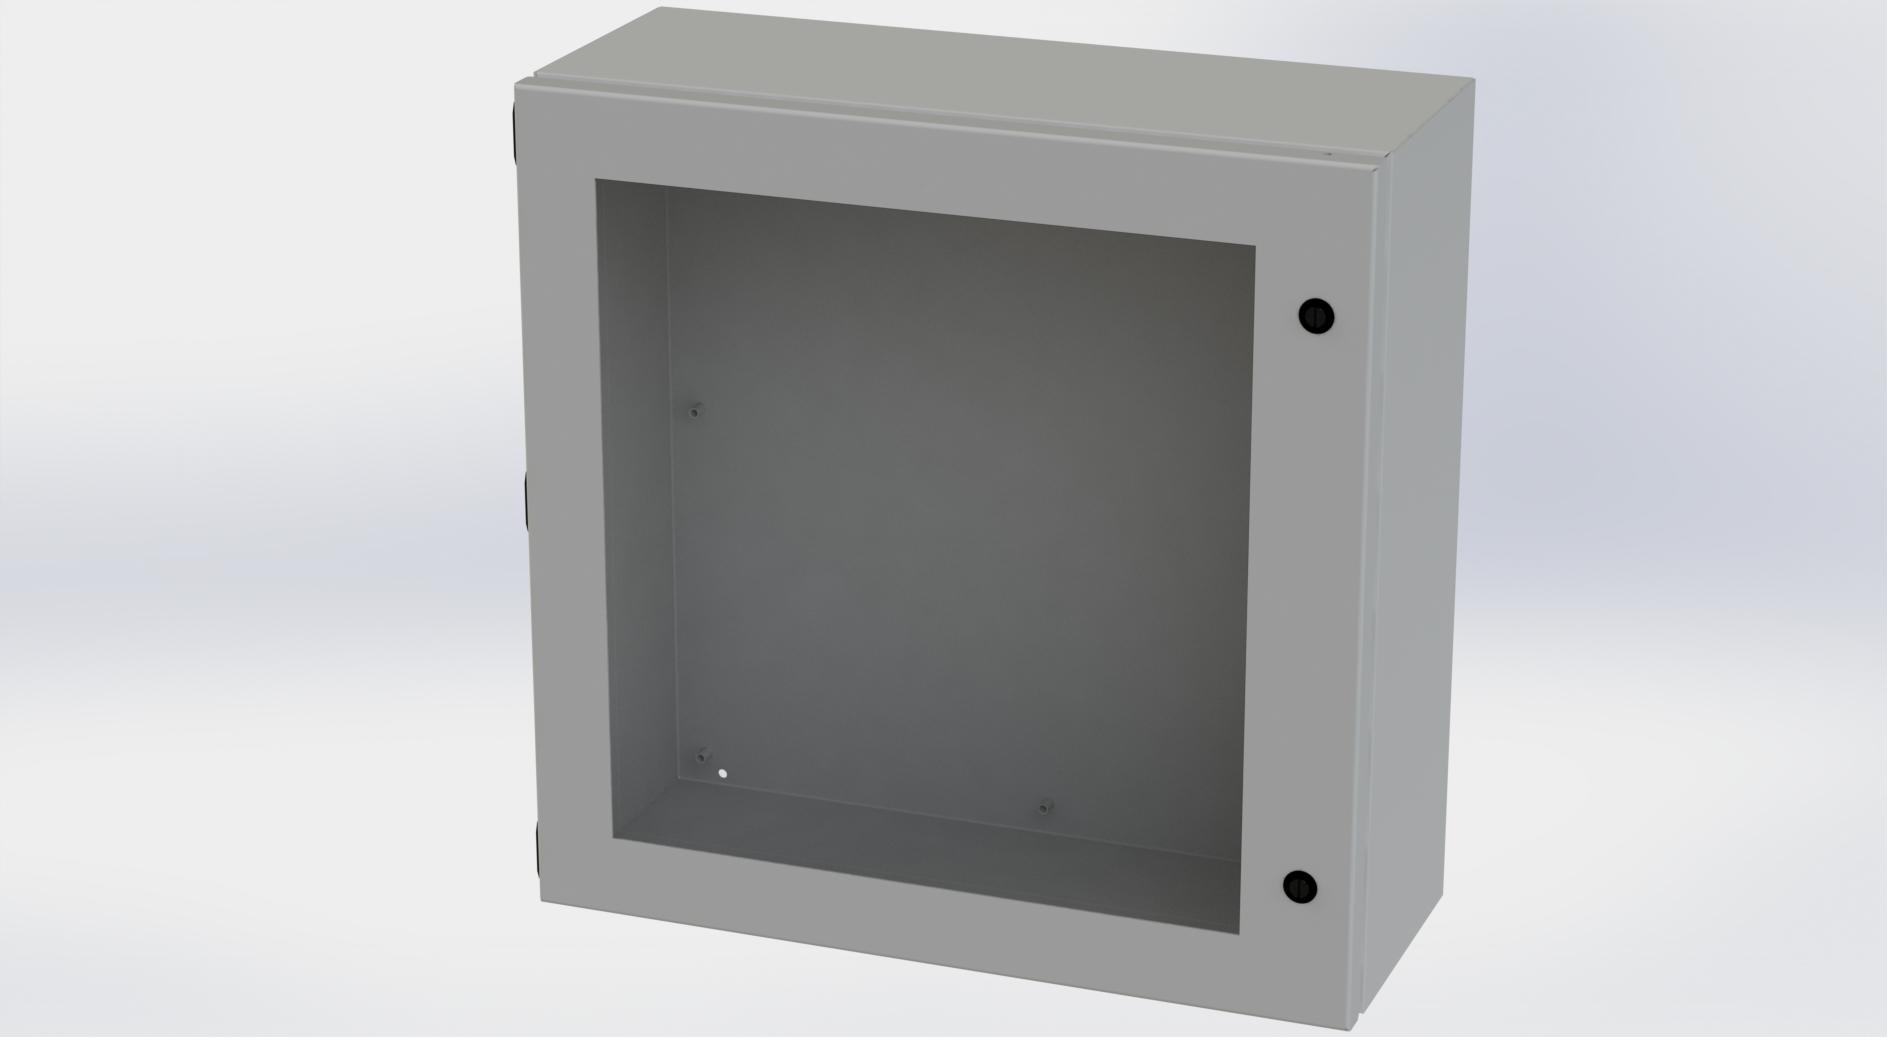 Saginaw Control SCE-20208ELJW ELJ Enclosure w/Viewing Window, Height:20.00", Width:20.00", Depth:8.00", ANSI-61 gray powder coating inside and out. Optional sub-panels are powder coated white.